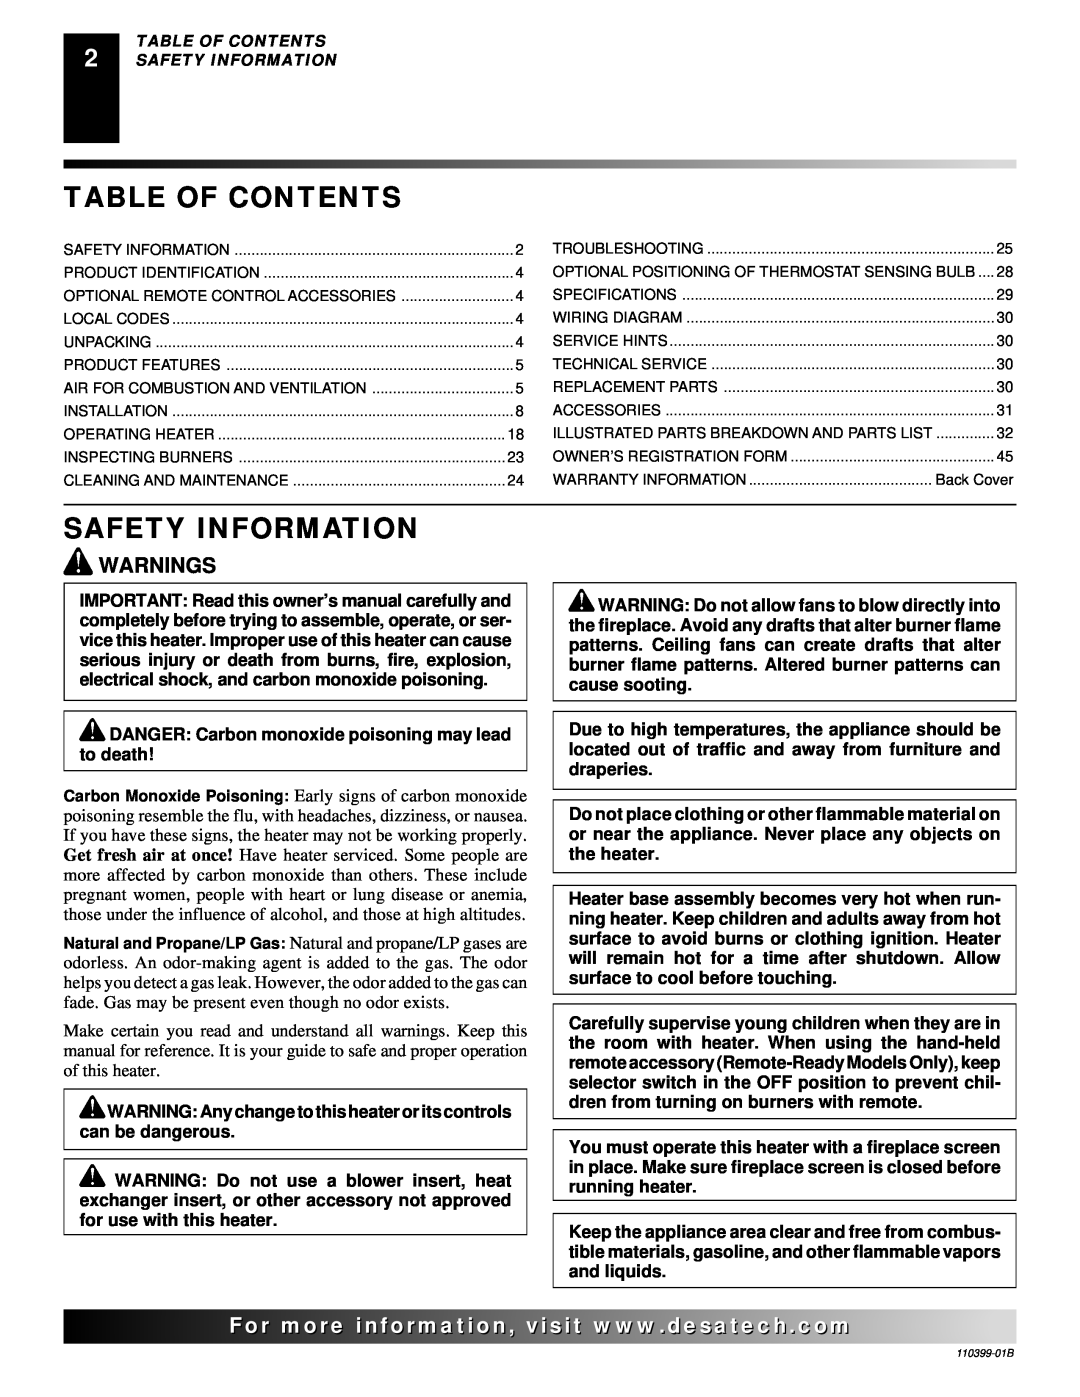 Desa FLAME-MAX VintageOak, LAME-MAX Golden Oak installation manual Table Of Contents, Safety Information, Warnings 